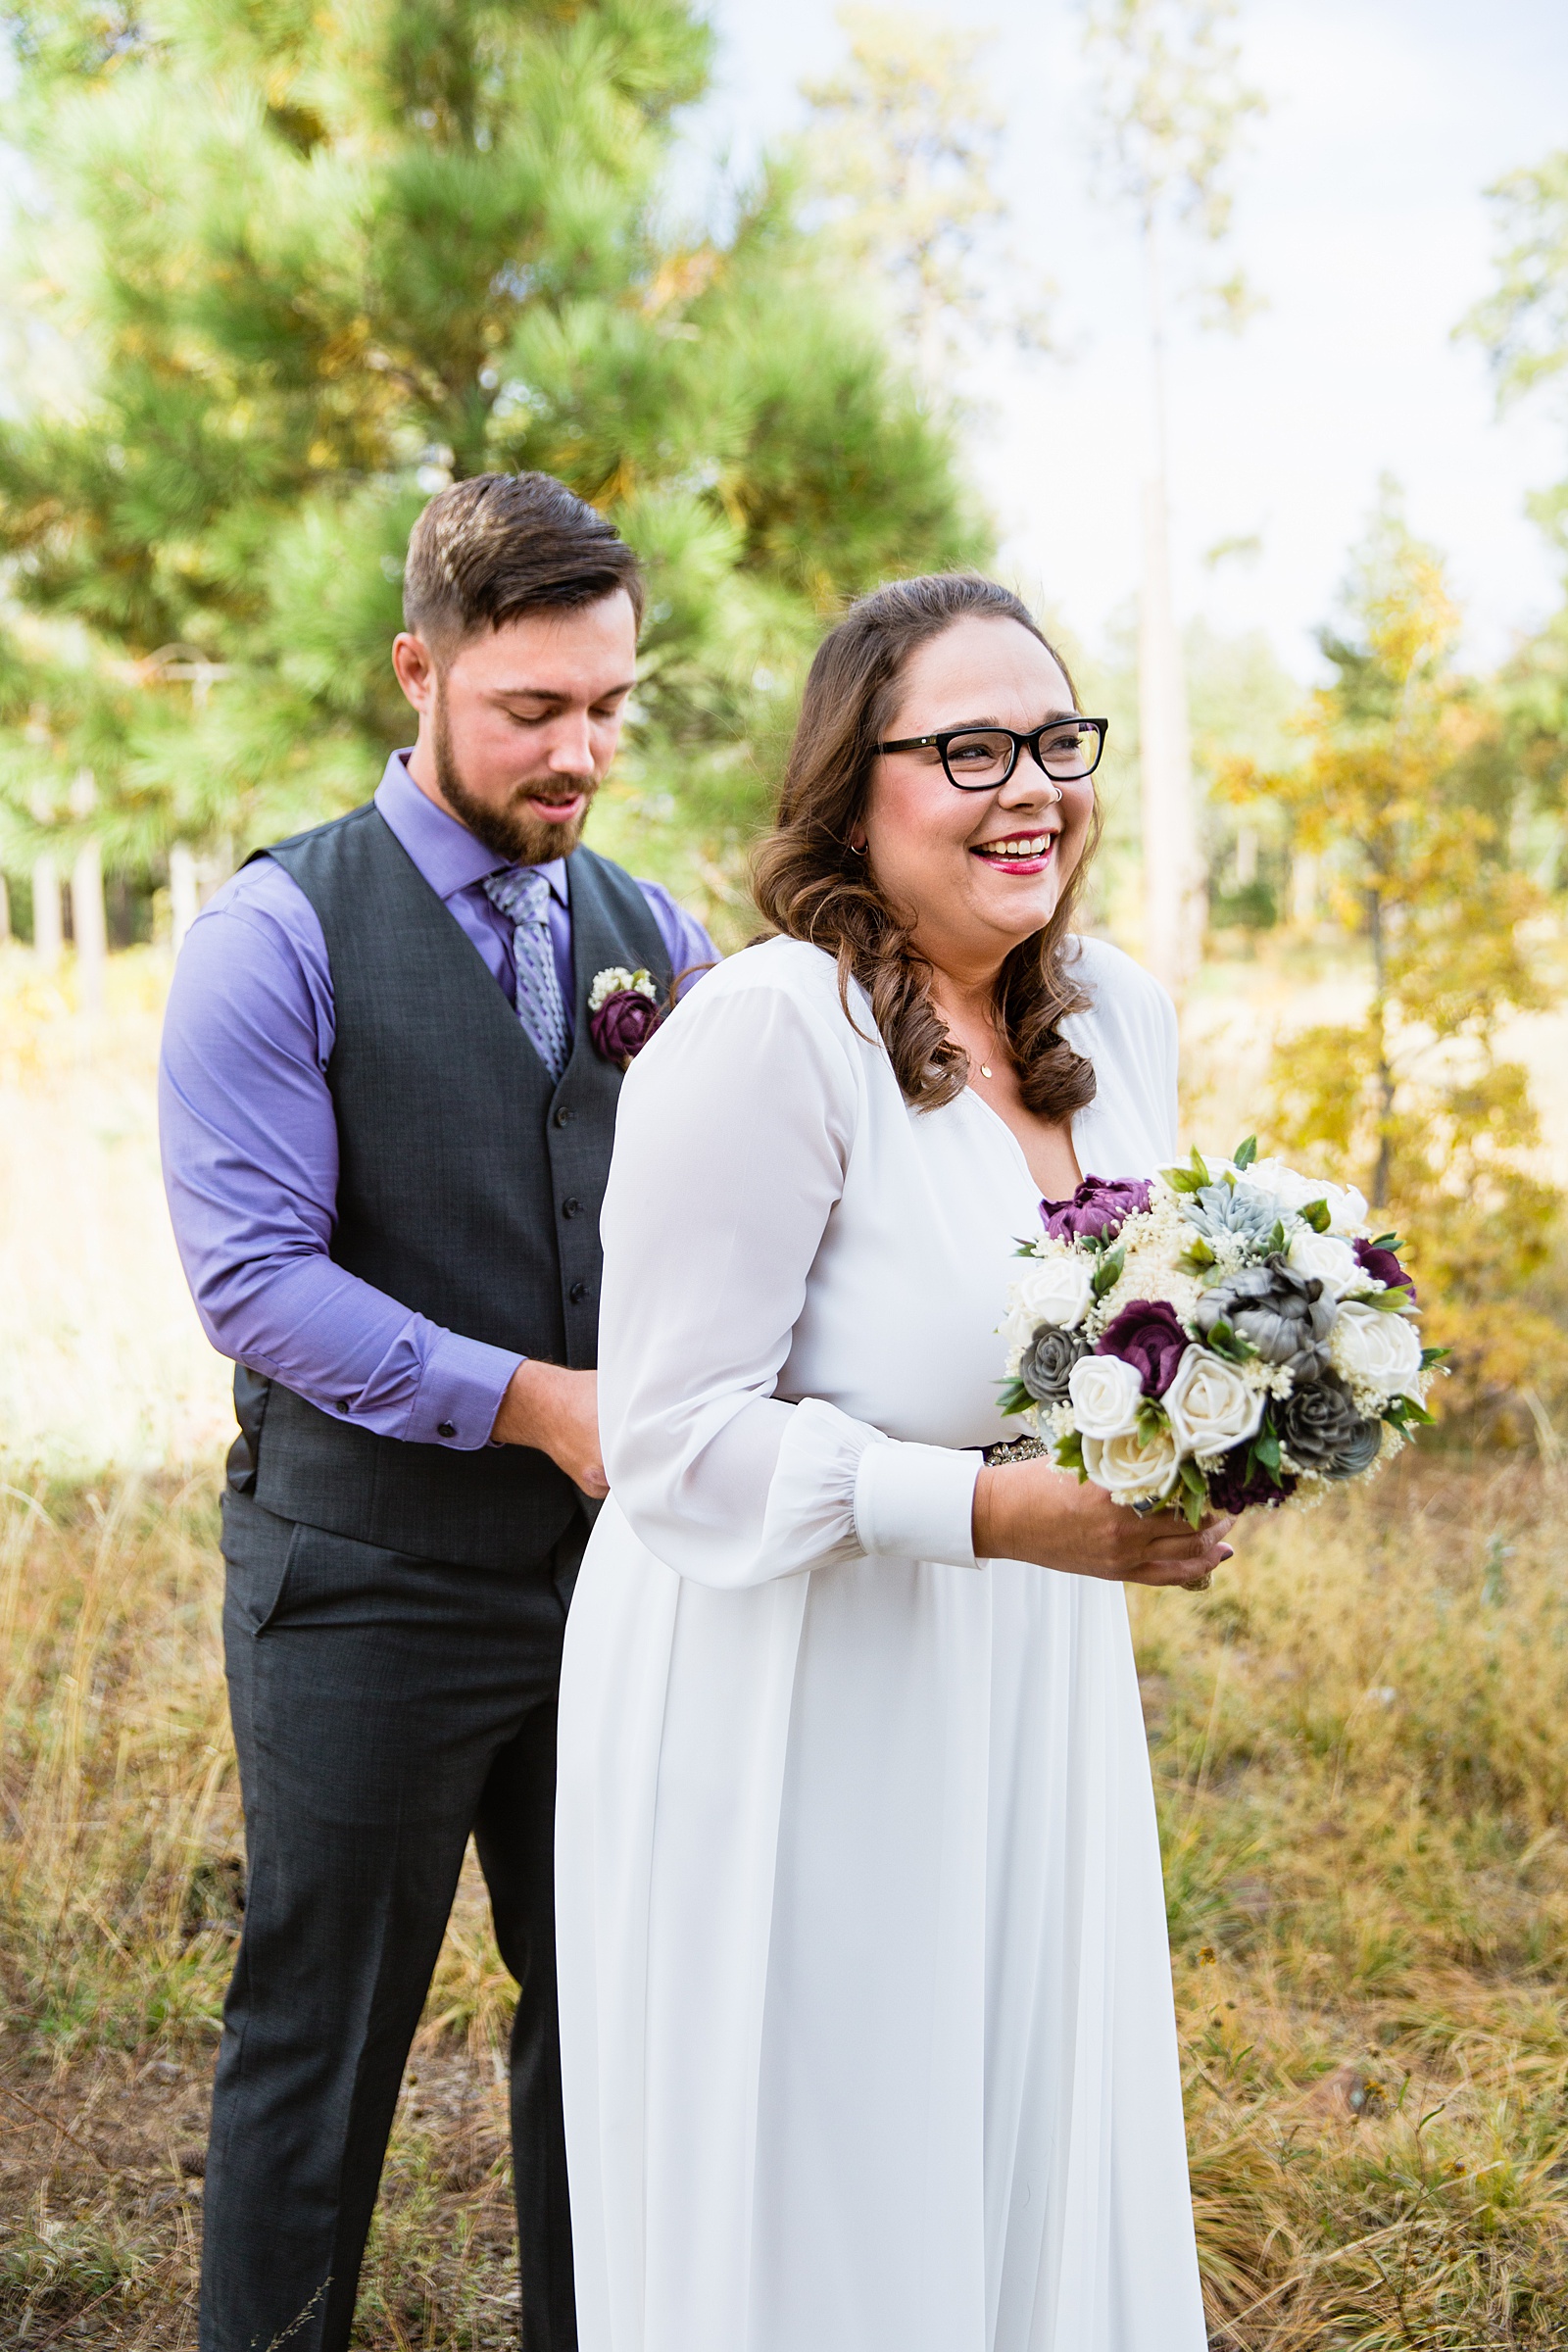 Bride laughing as the groom helps her tie on her purple sash while getting ready for their elopement by Arizona elopement photographers PMA Photographer